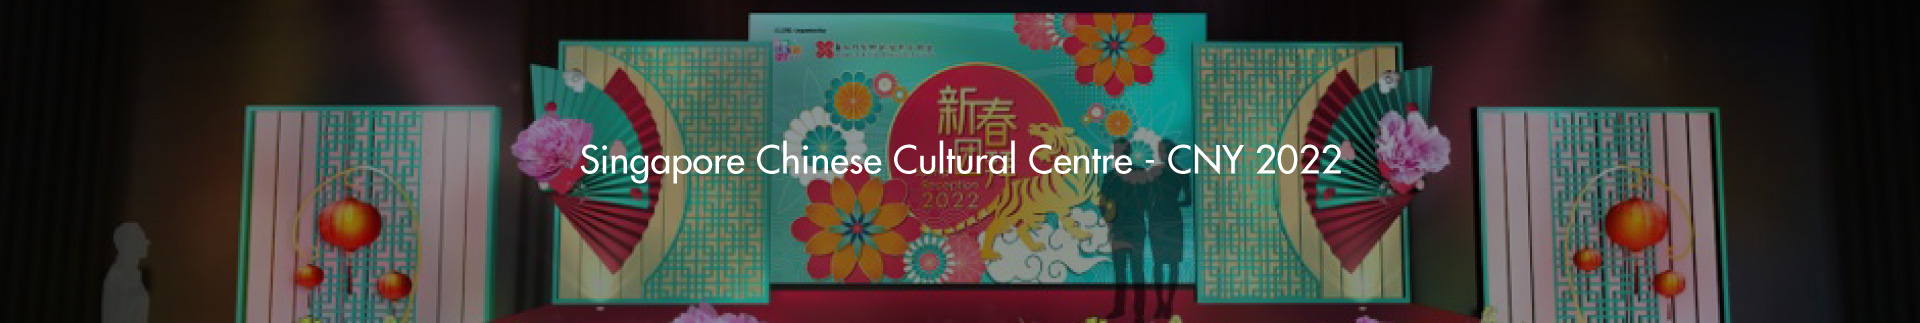 Singapore Chinese Cultural Centre – CNY 2022